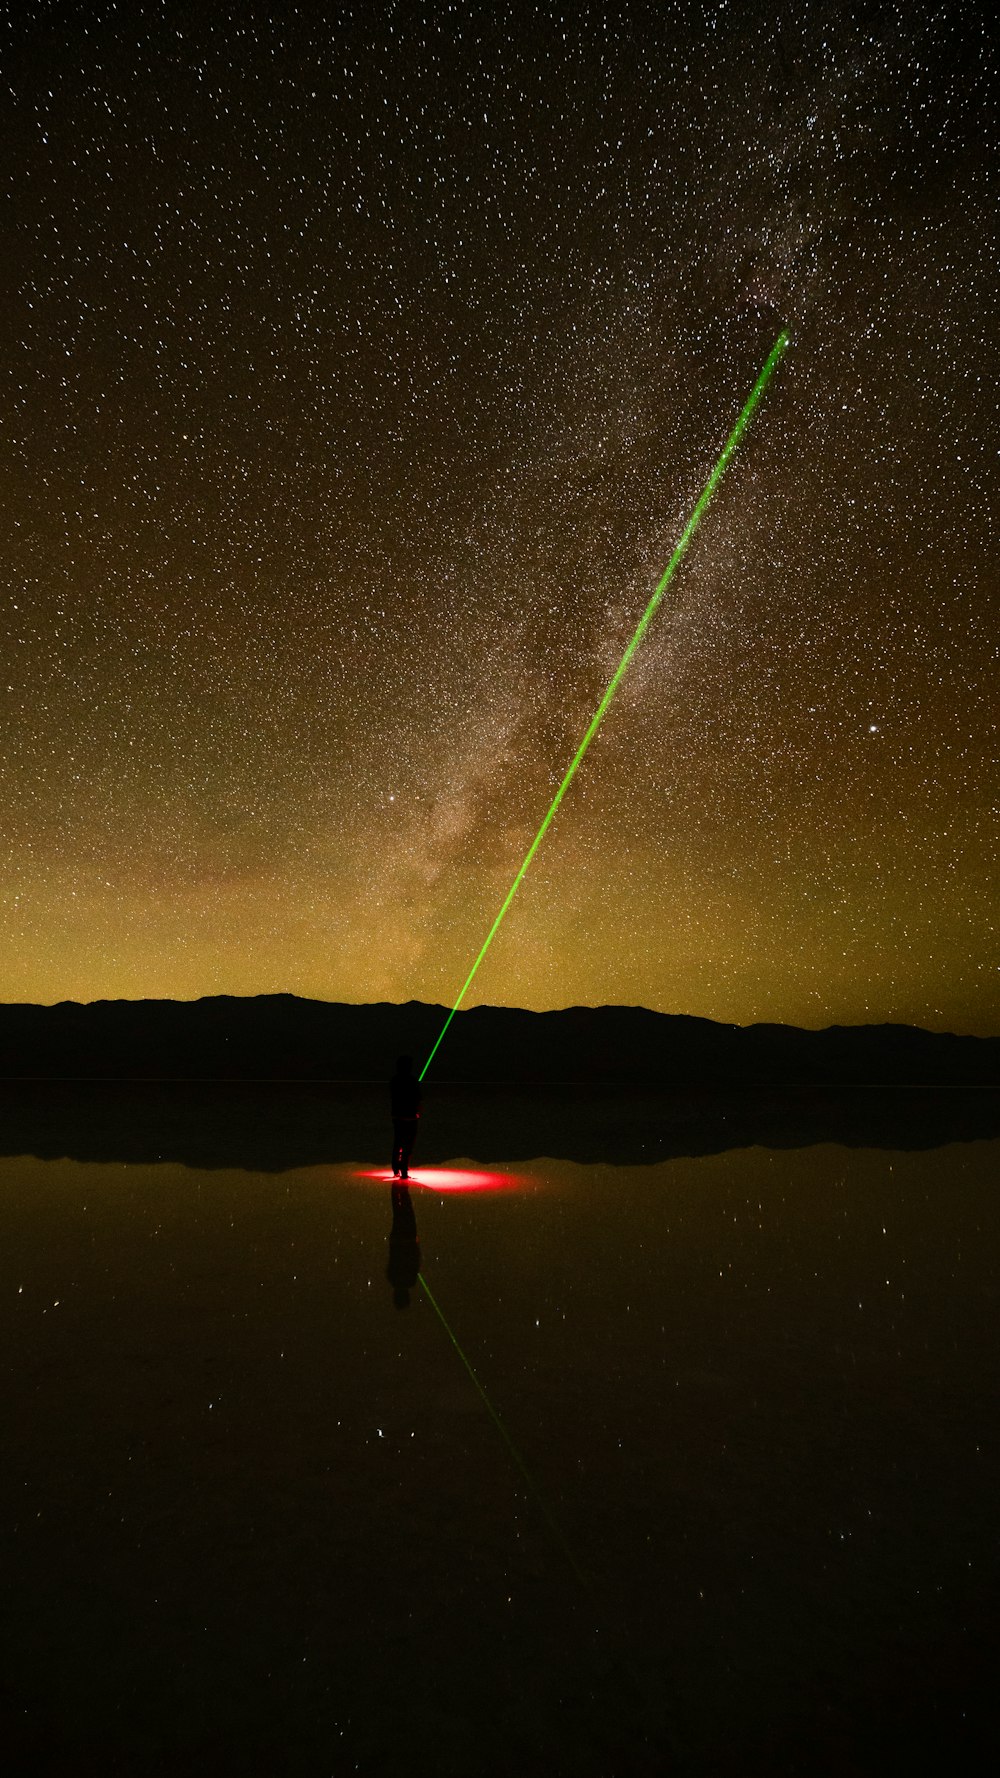 a green laser is visible in the night sky